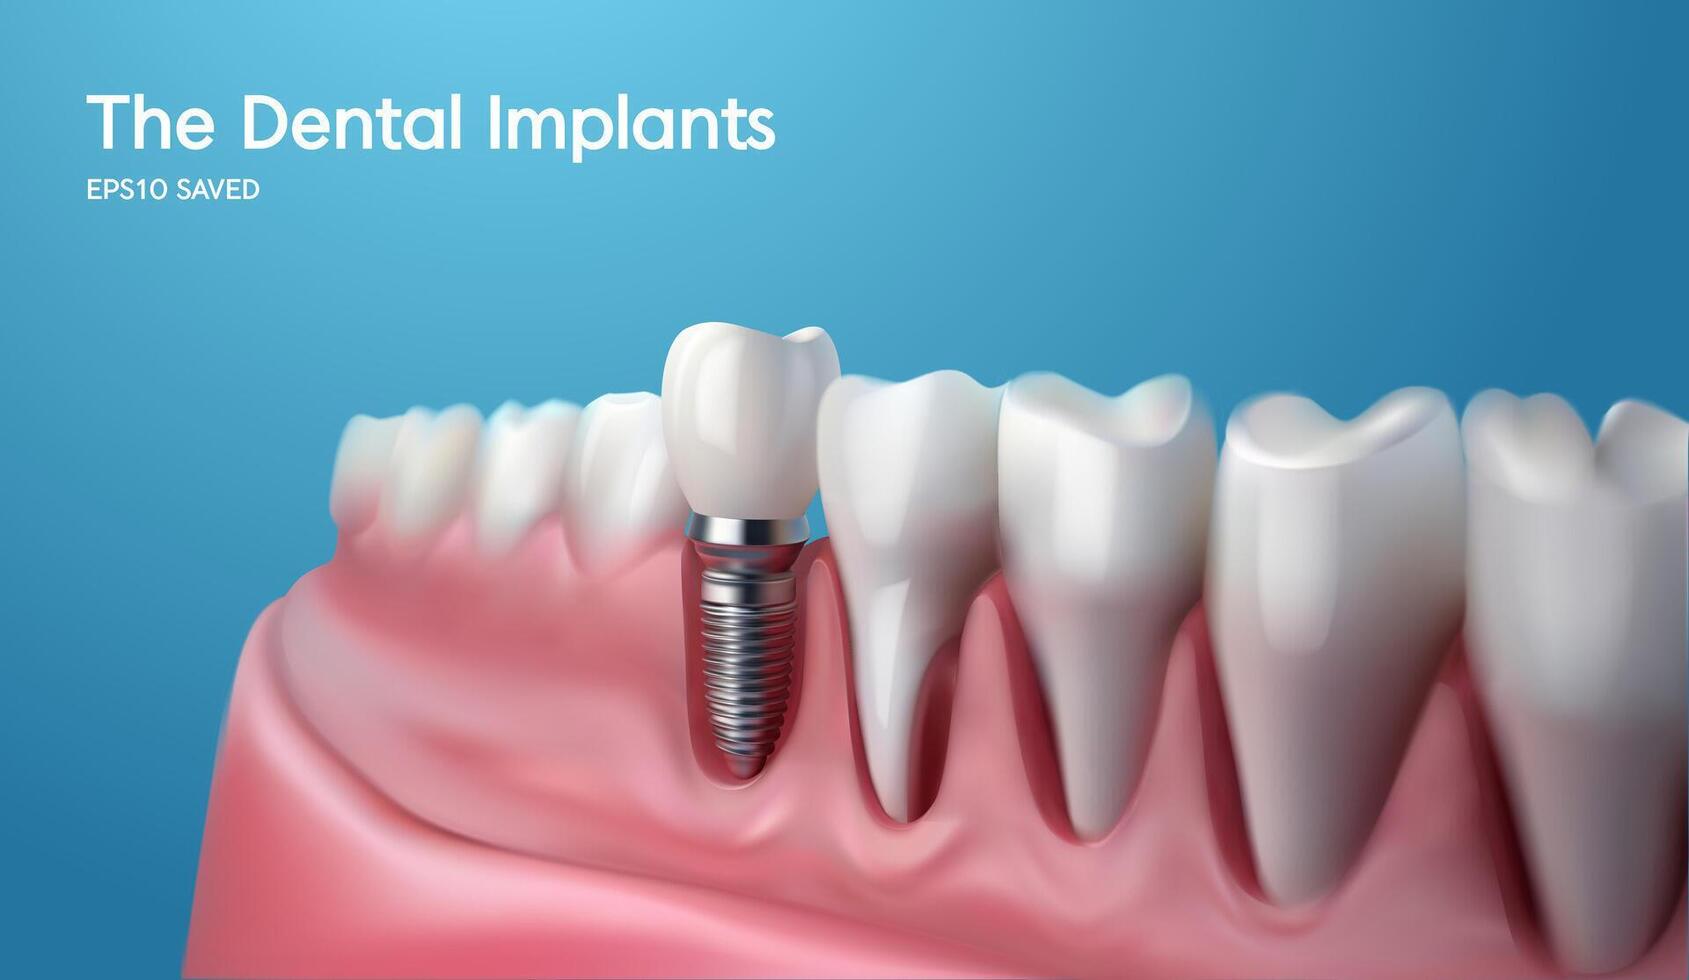 White tooth implant implant cut, healthy tooth or dental surgery. vector